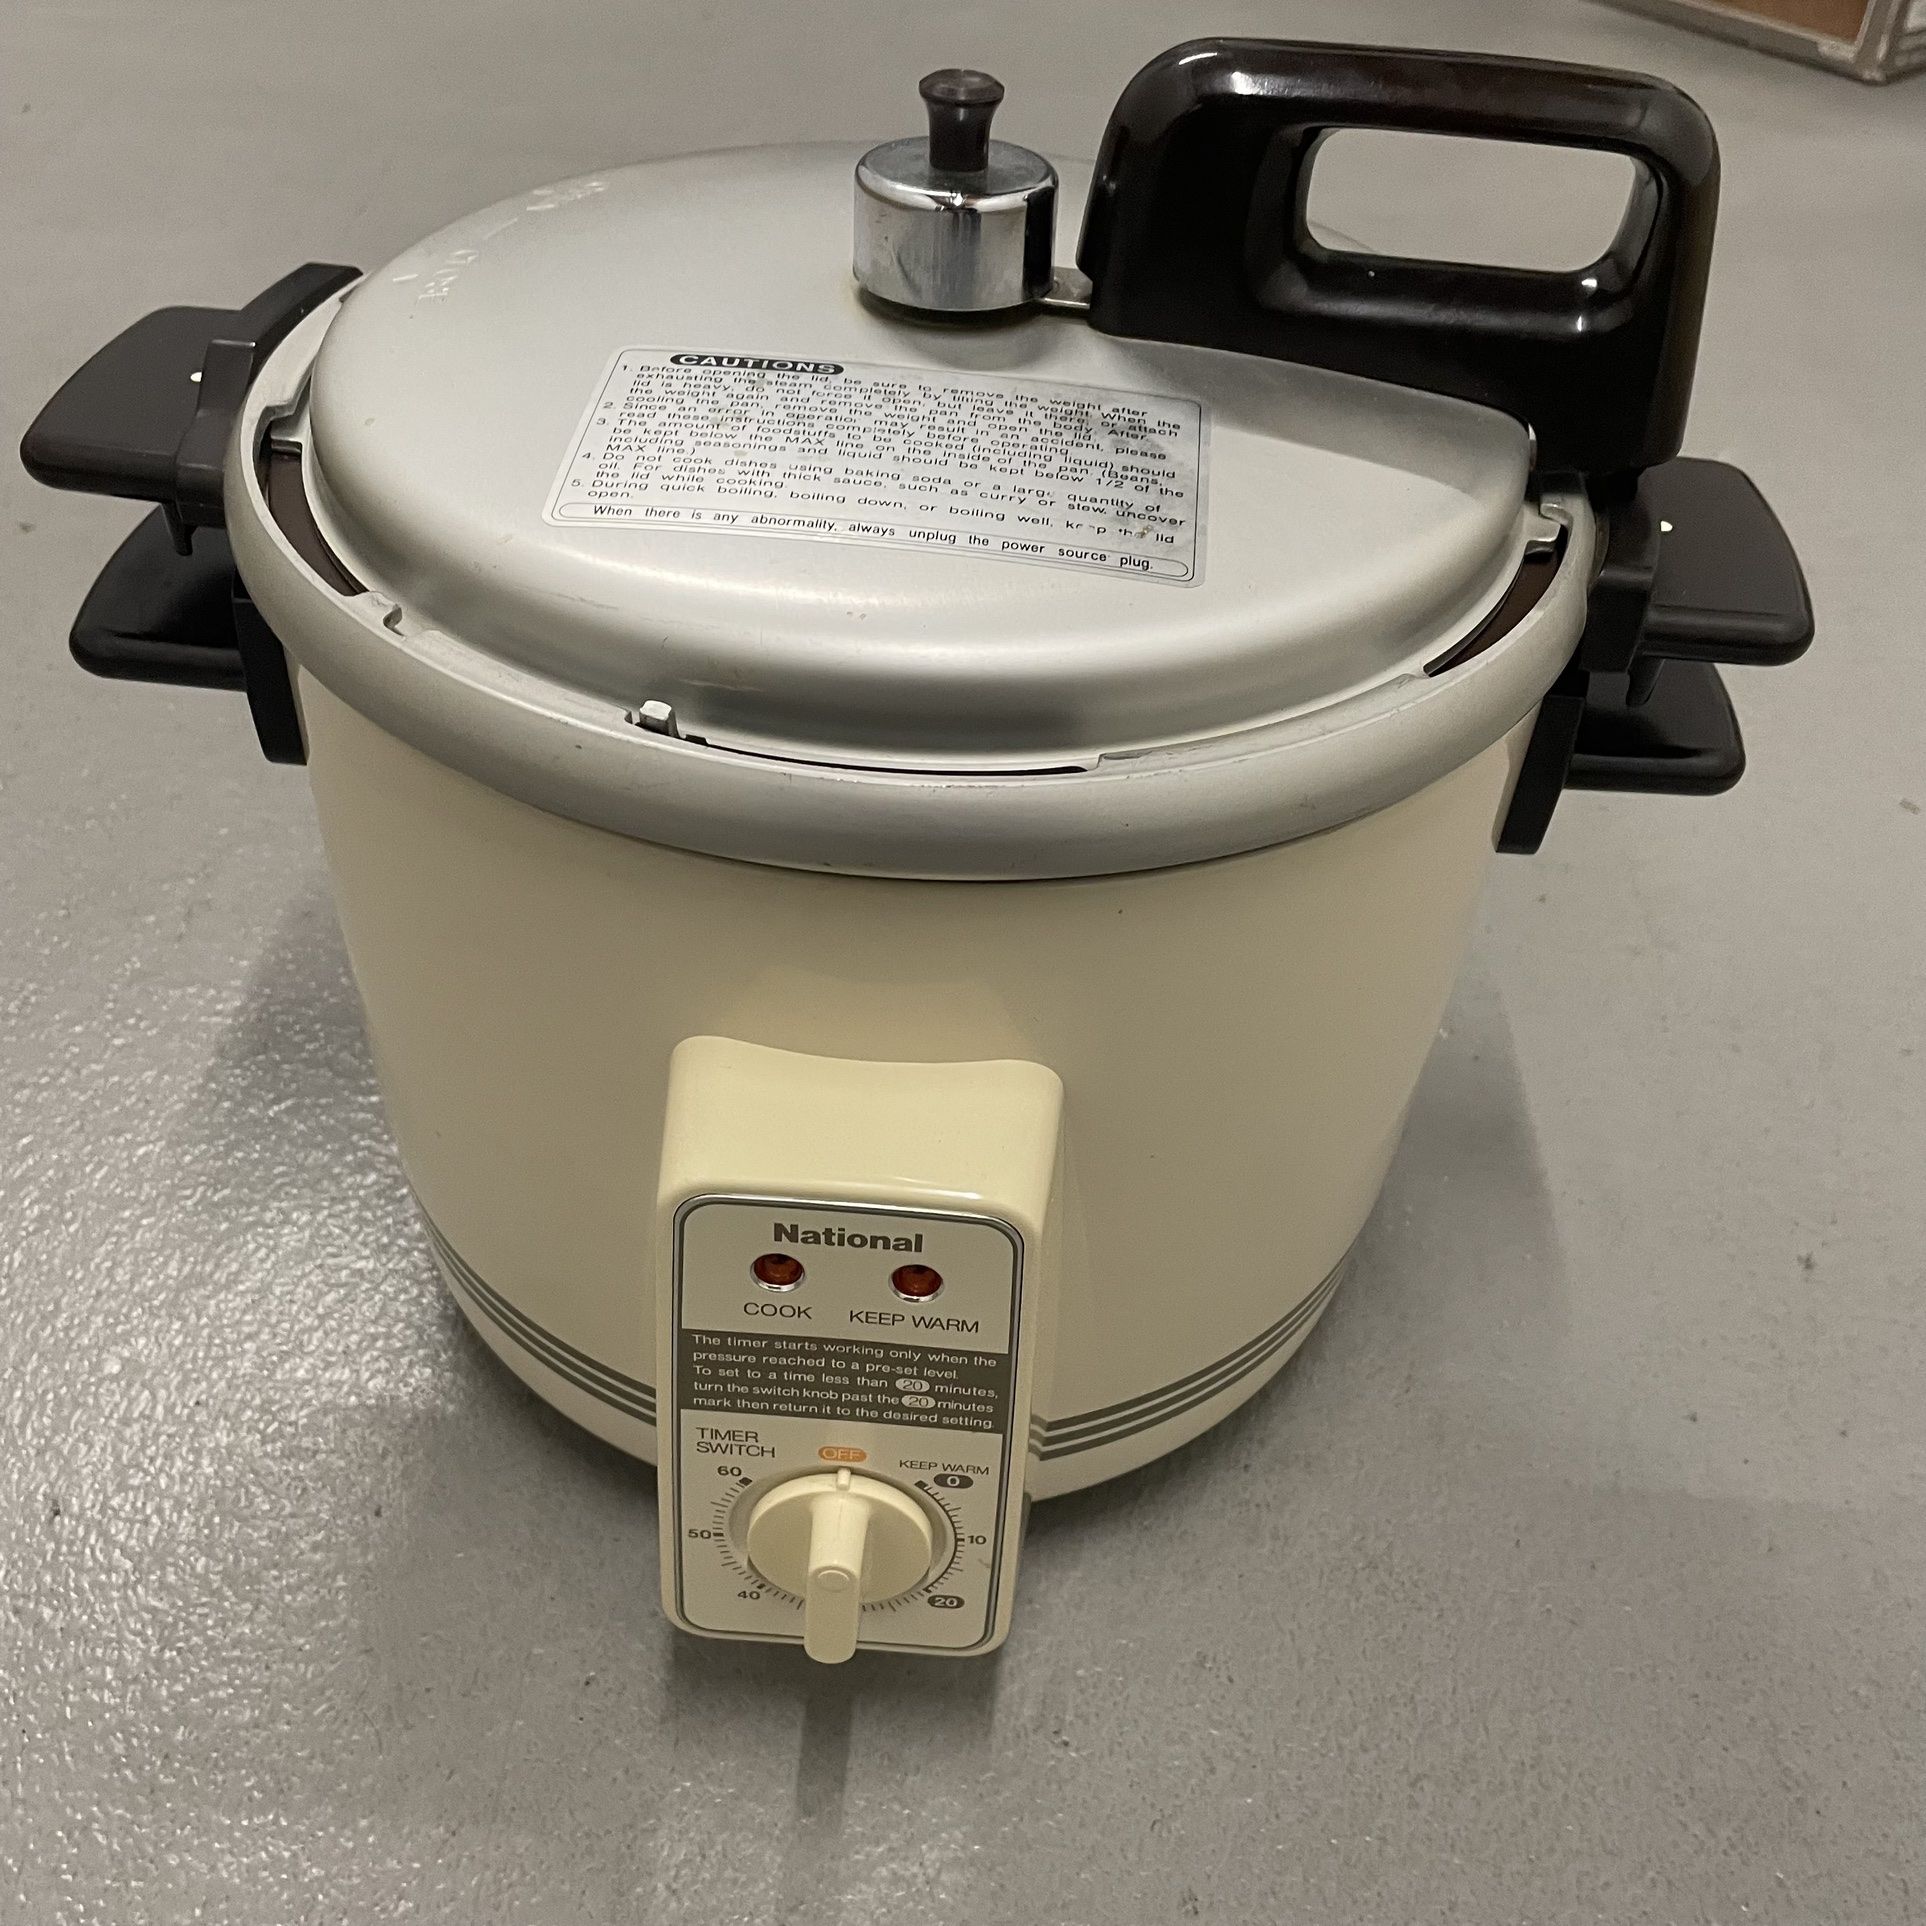 Power Cooker Digital Pressure Cooker PC-TR16 NEW for Sale in Raleigh, NC -  OfferUp